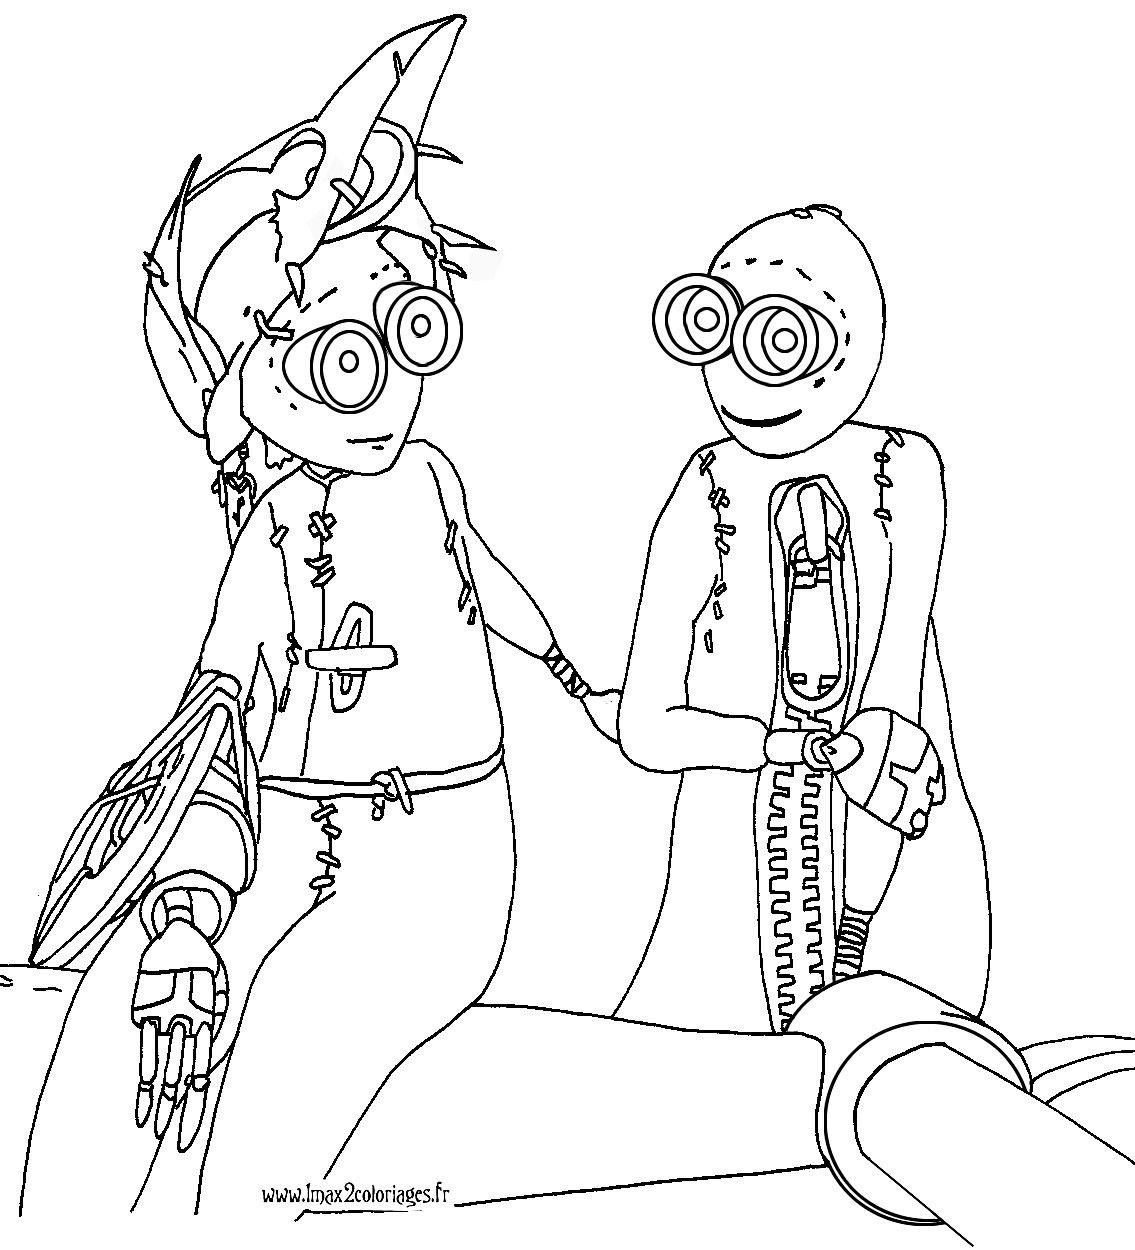 Alice In Wonderland (Tim Burton) Coloring Pages - Coloring Home